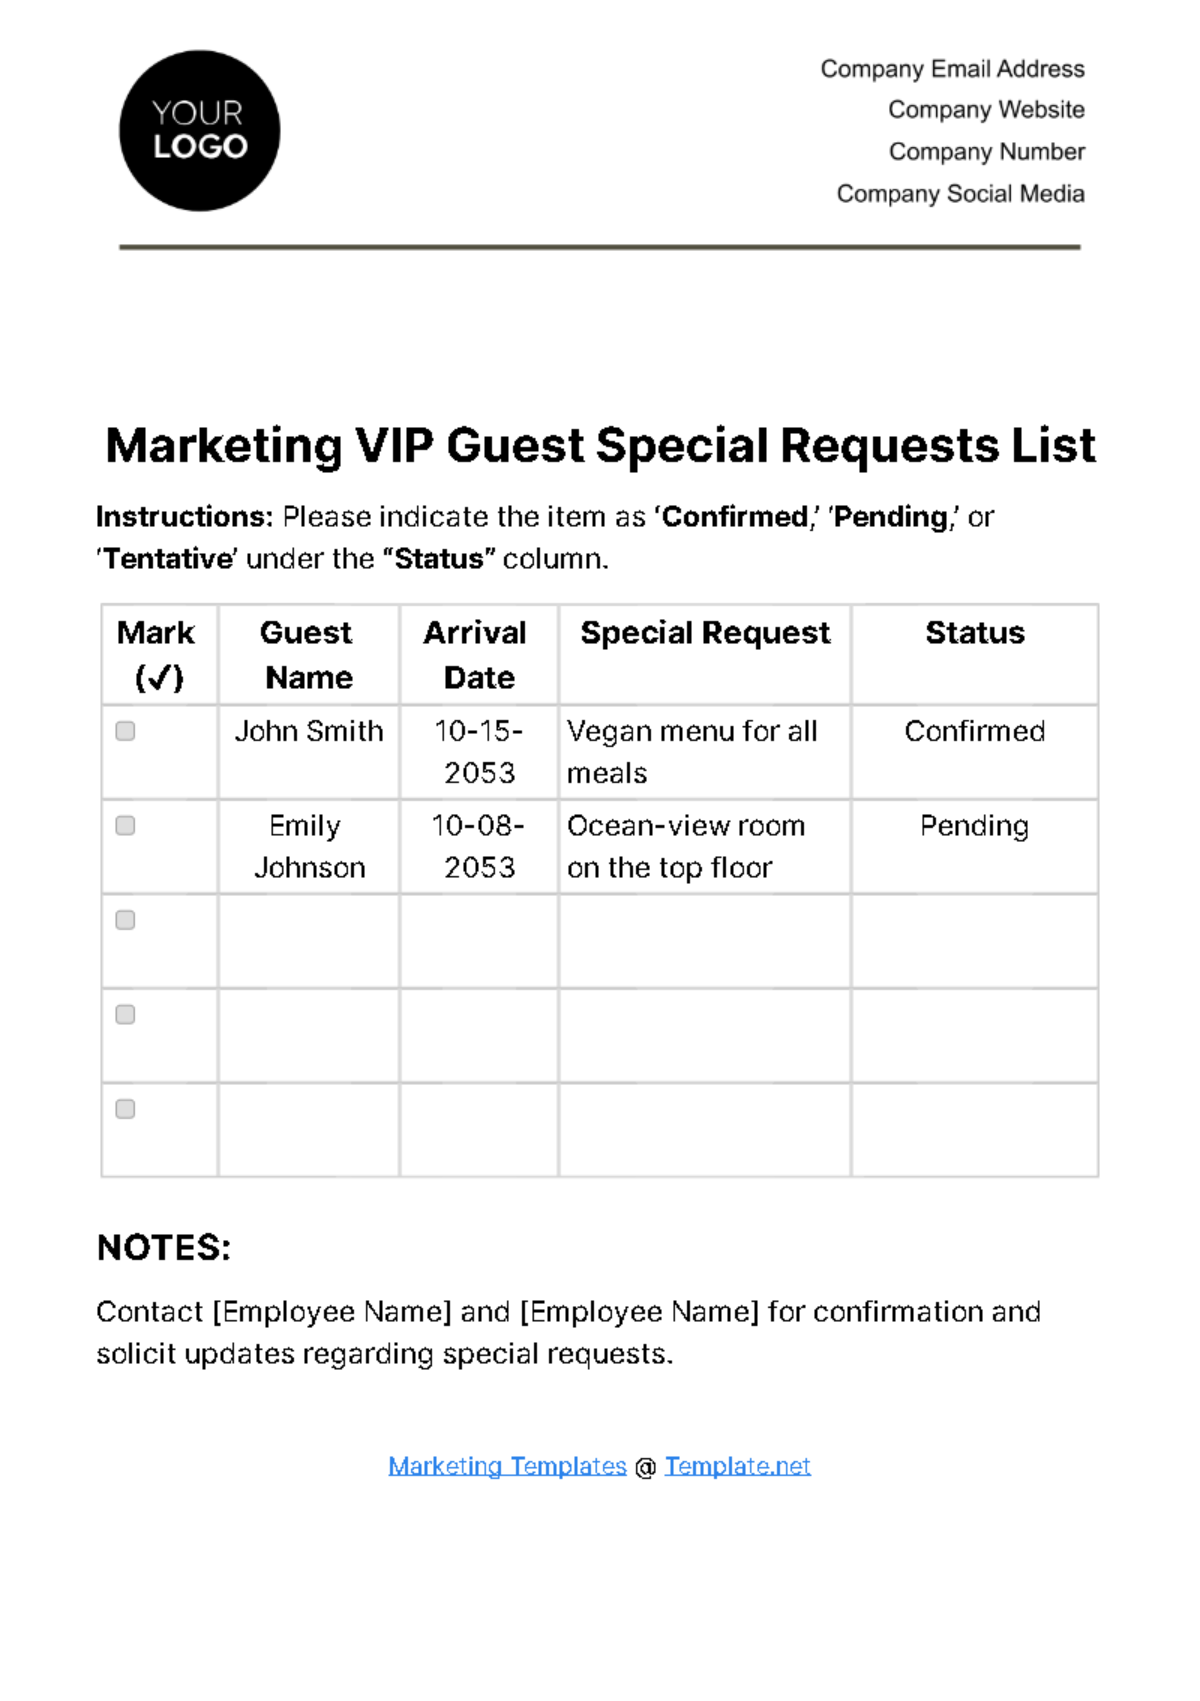 Marketing VIP Guest Special Requests List Template